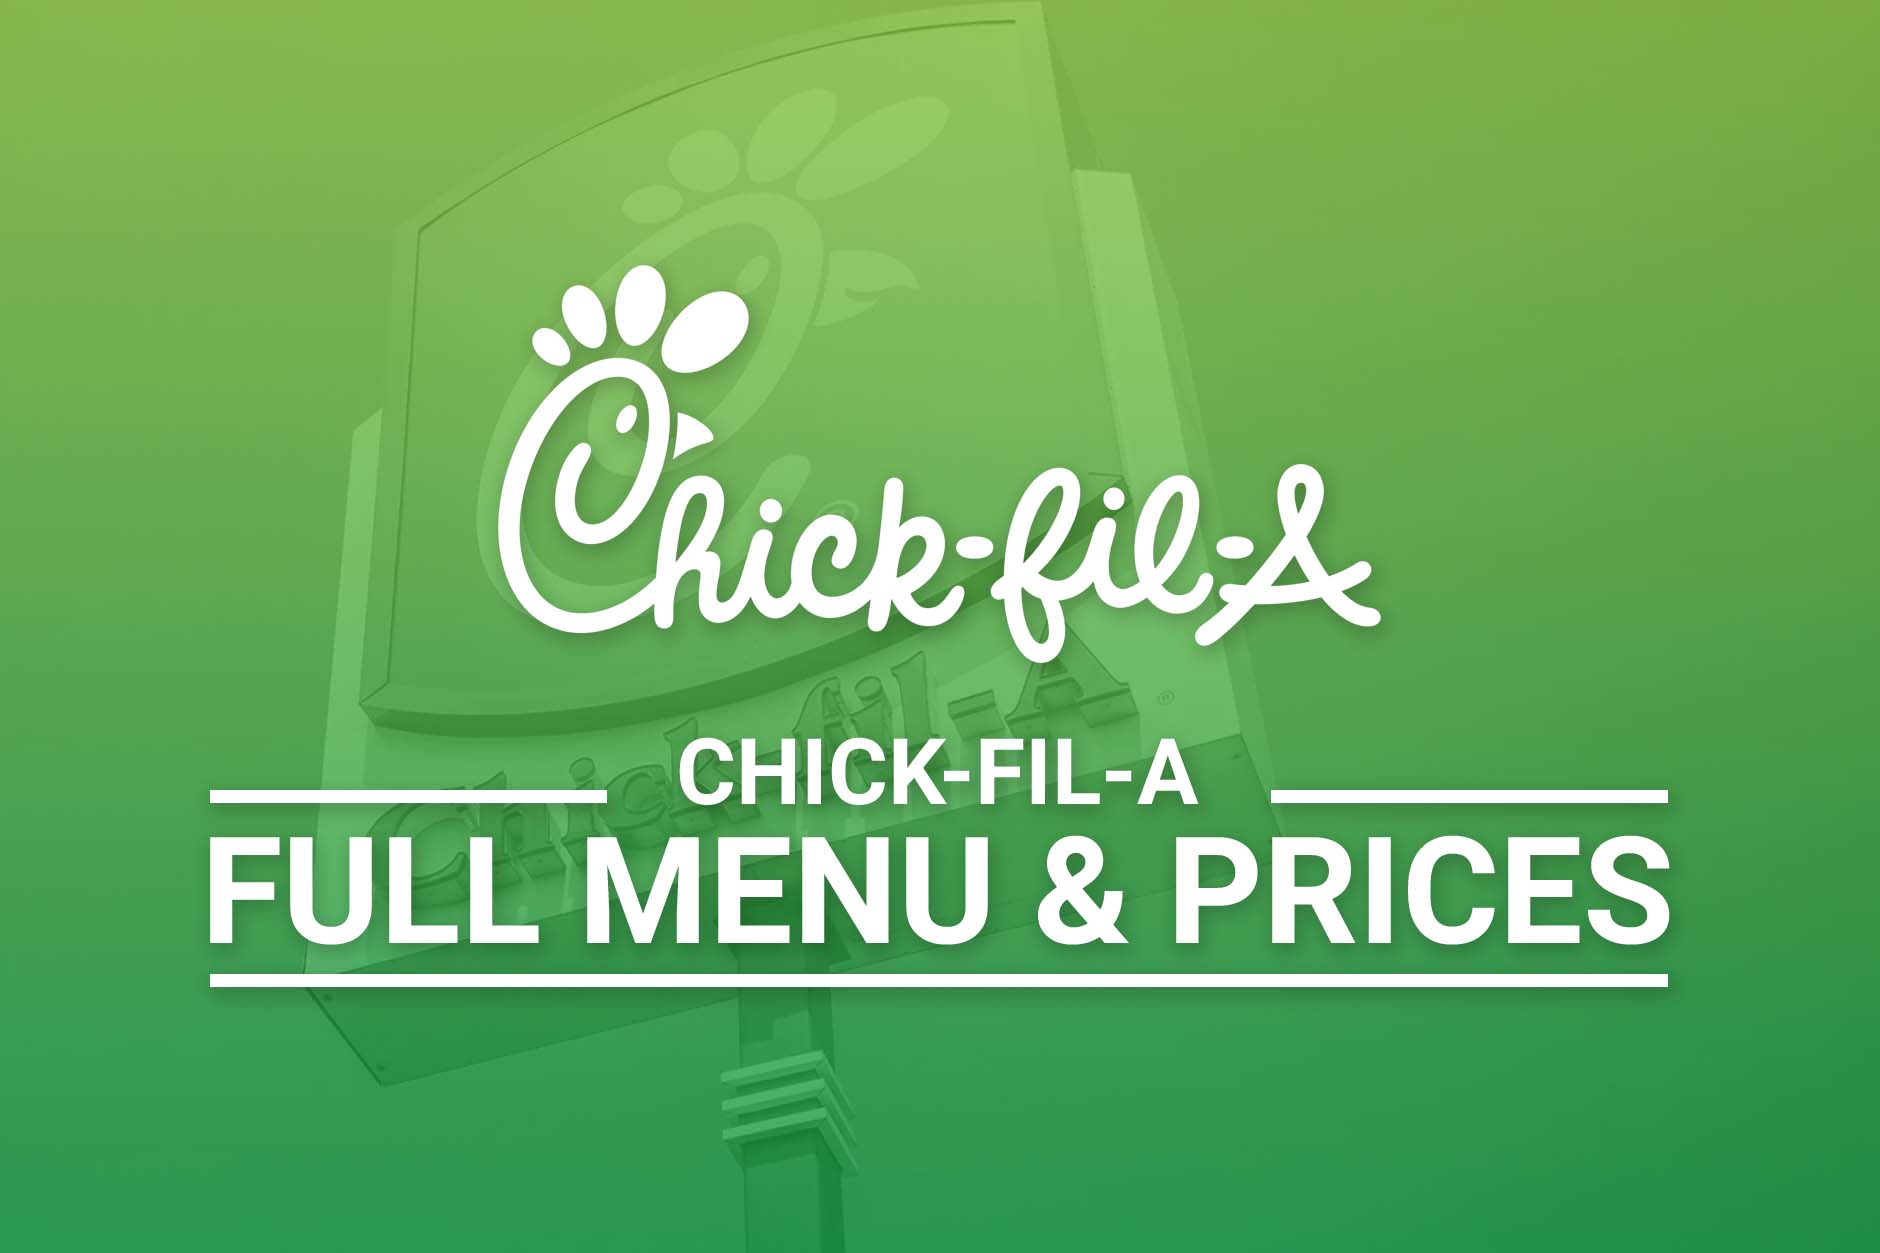 chick-fil-a menu and prices